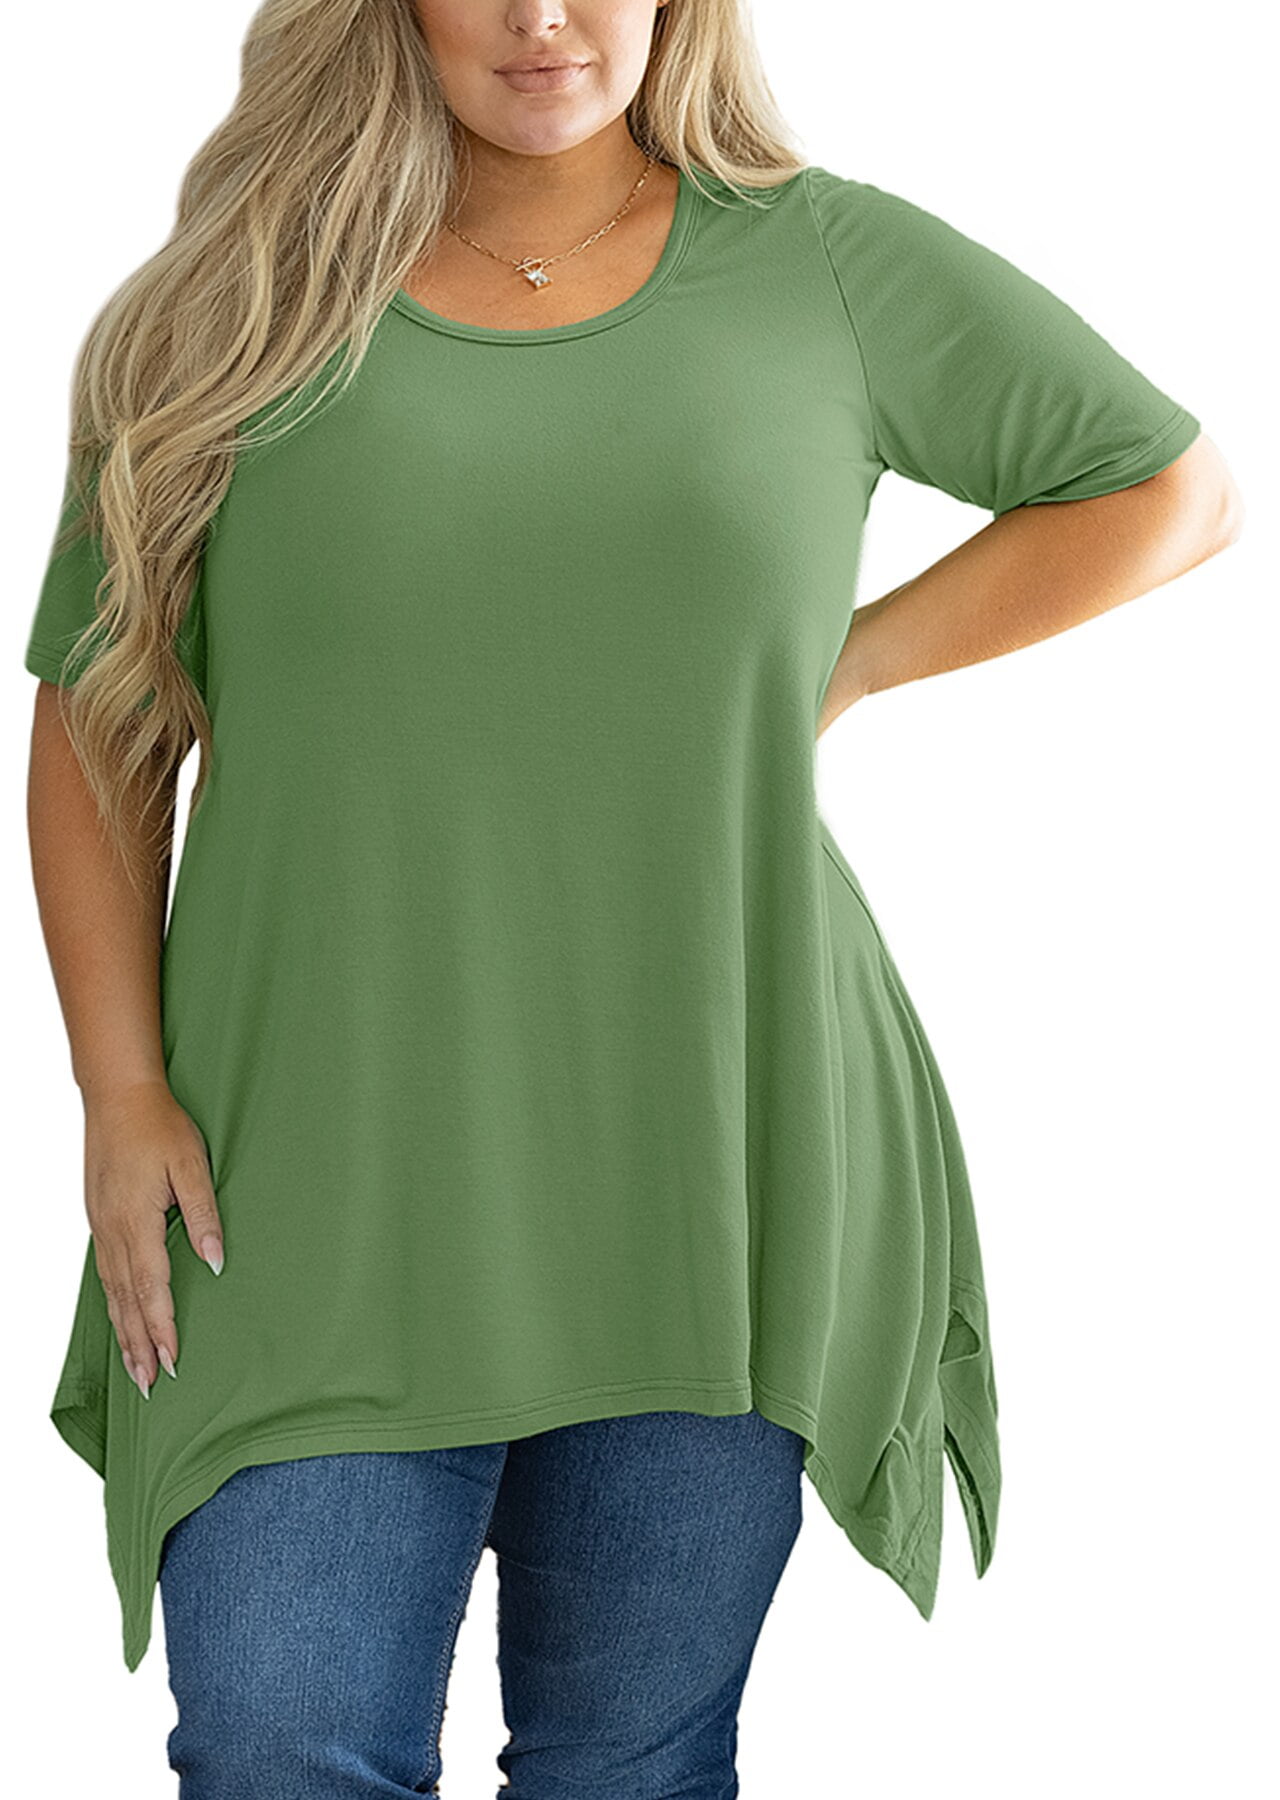 SHOWMALL Plus Size Clothing for Women Tunic Tops Short Sleeve Grey Blue 2X  Summer Blouse Swing Tee Crewneck Clothes Flowy Shirt for Leggings 